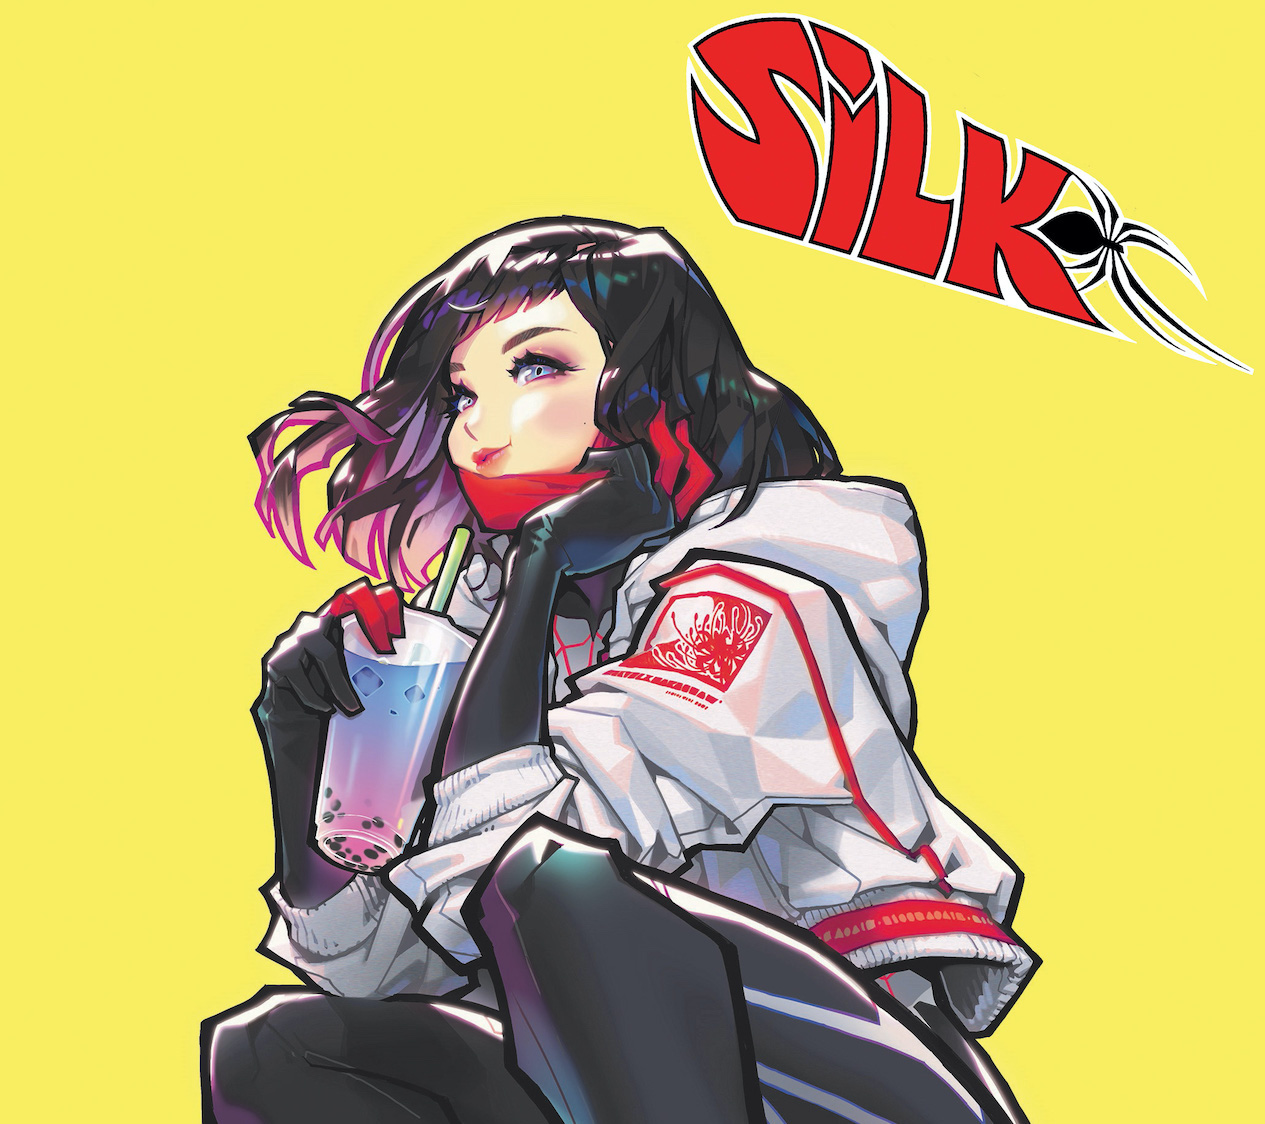 EXCLUSIVE First Look: Silk #2 variant cover